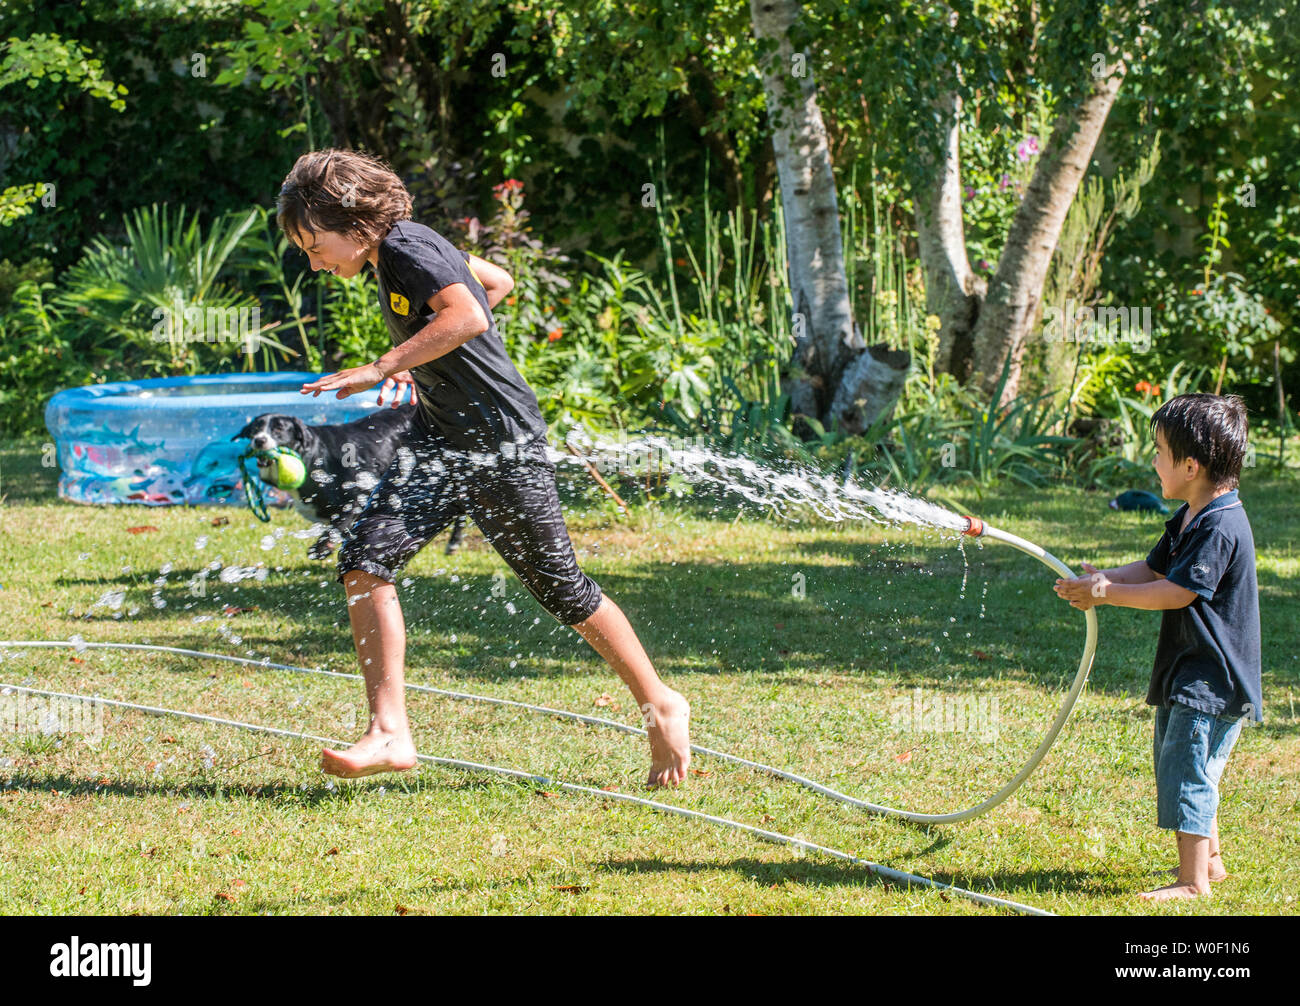 Two boys of 4 years old and 12 years old playing with a hose in the garden Stock Photo